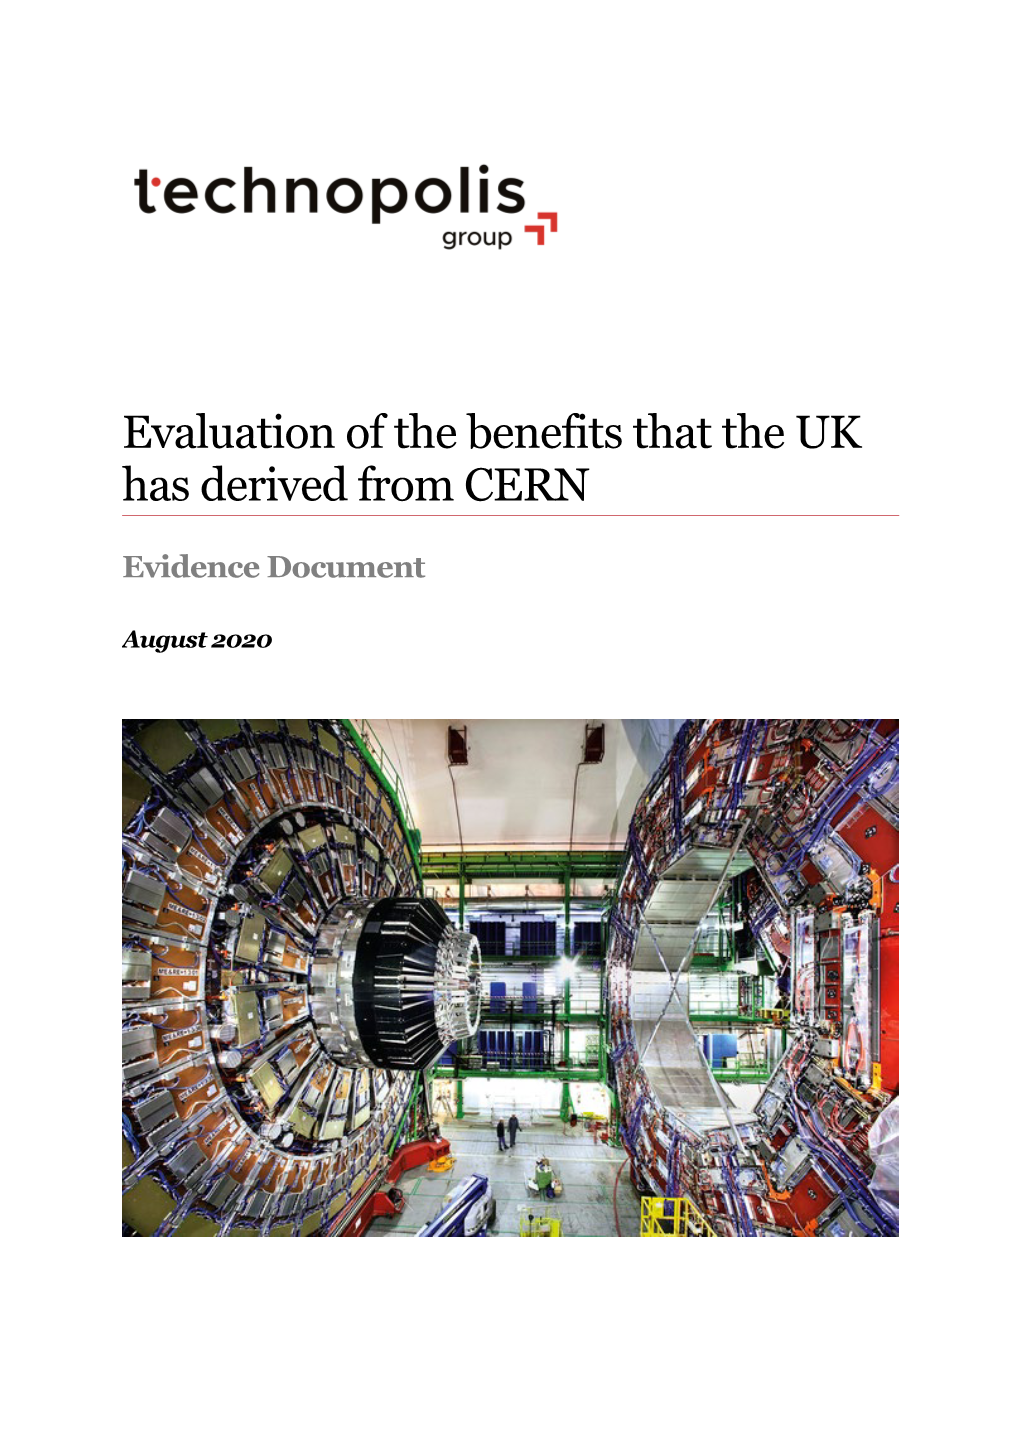 Evaluation of the Benefits That the UK Has Derived from CERN